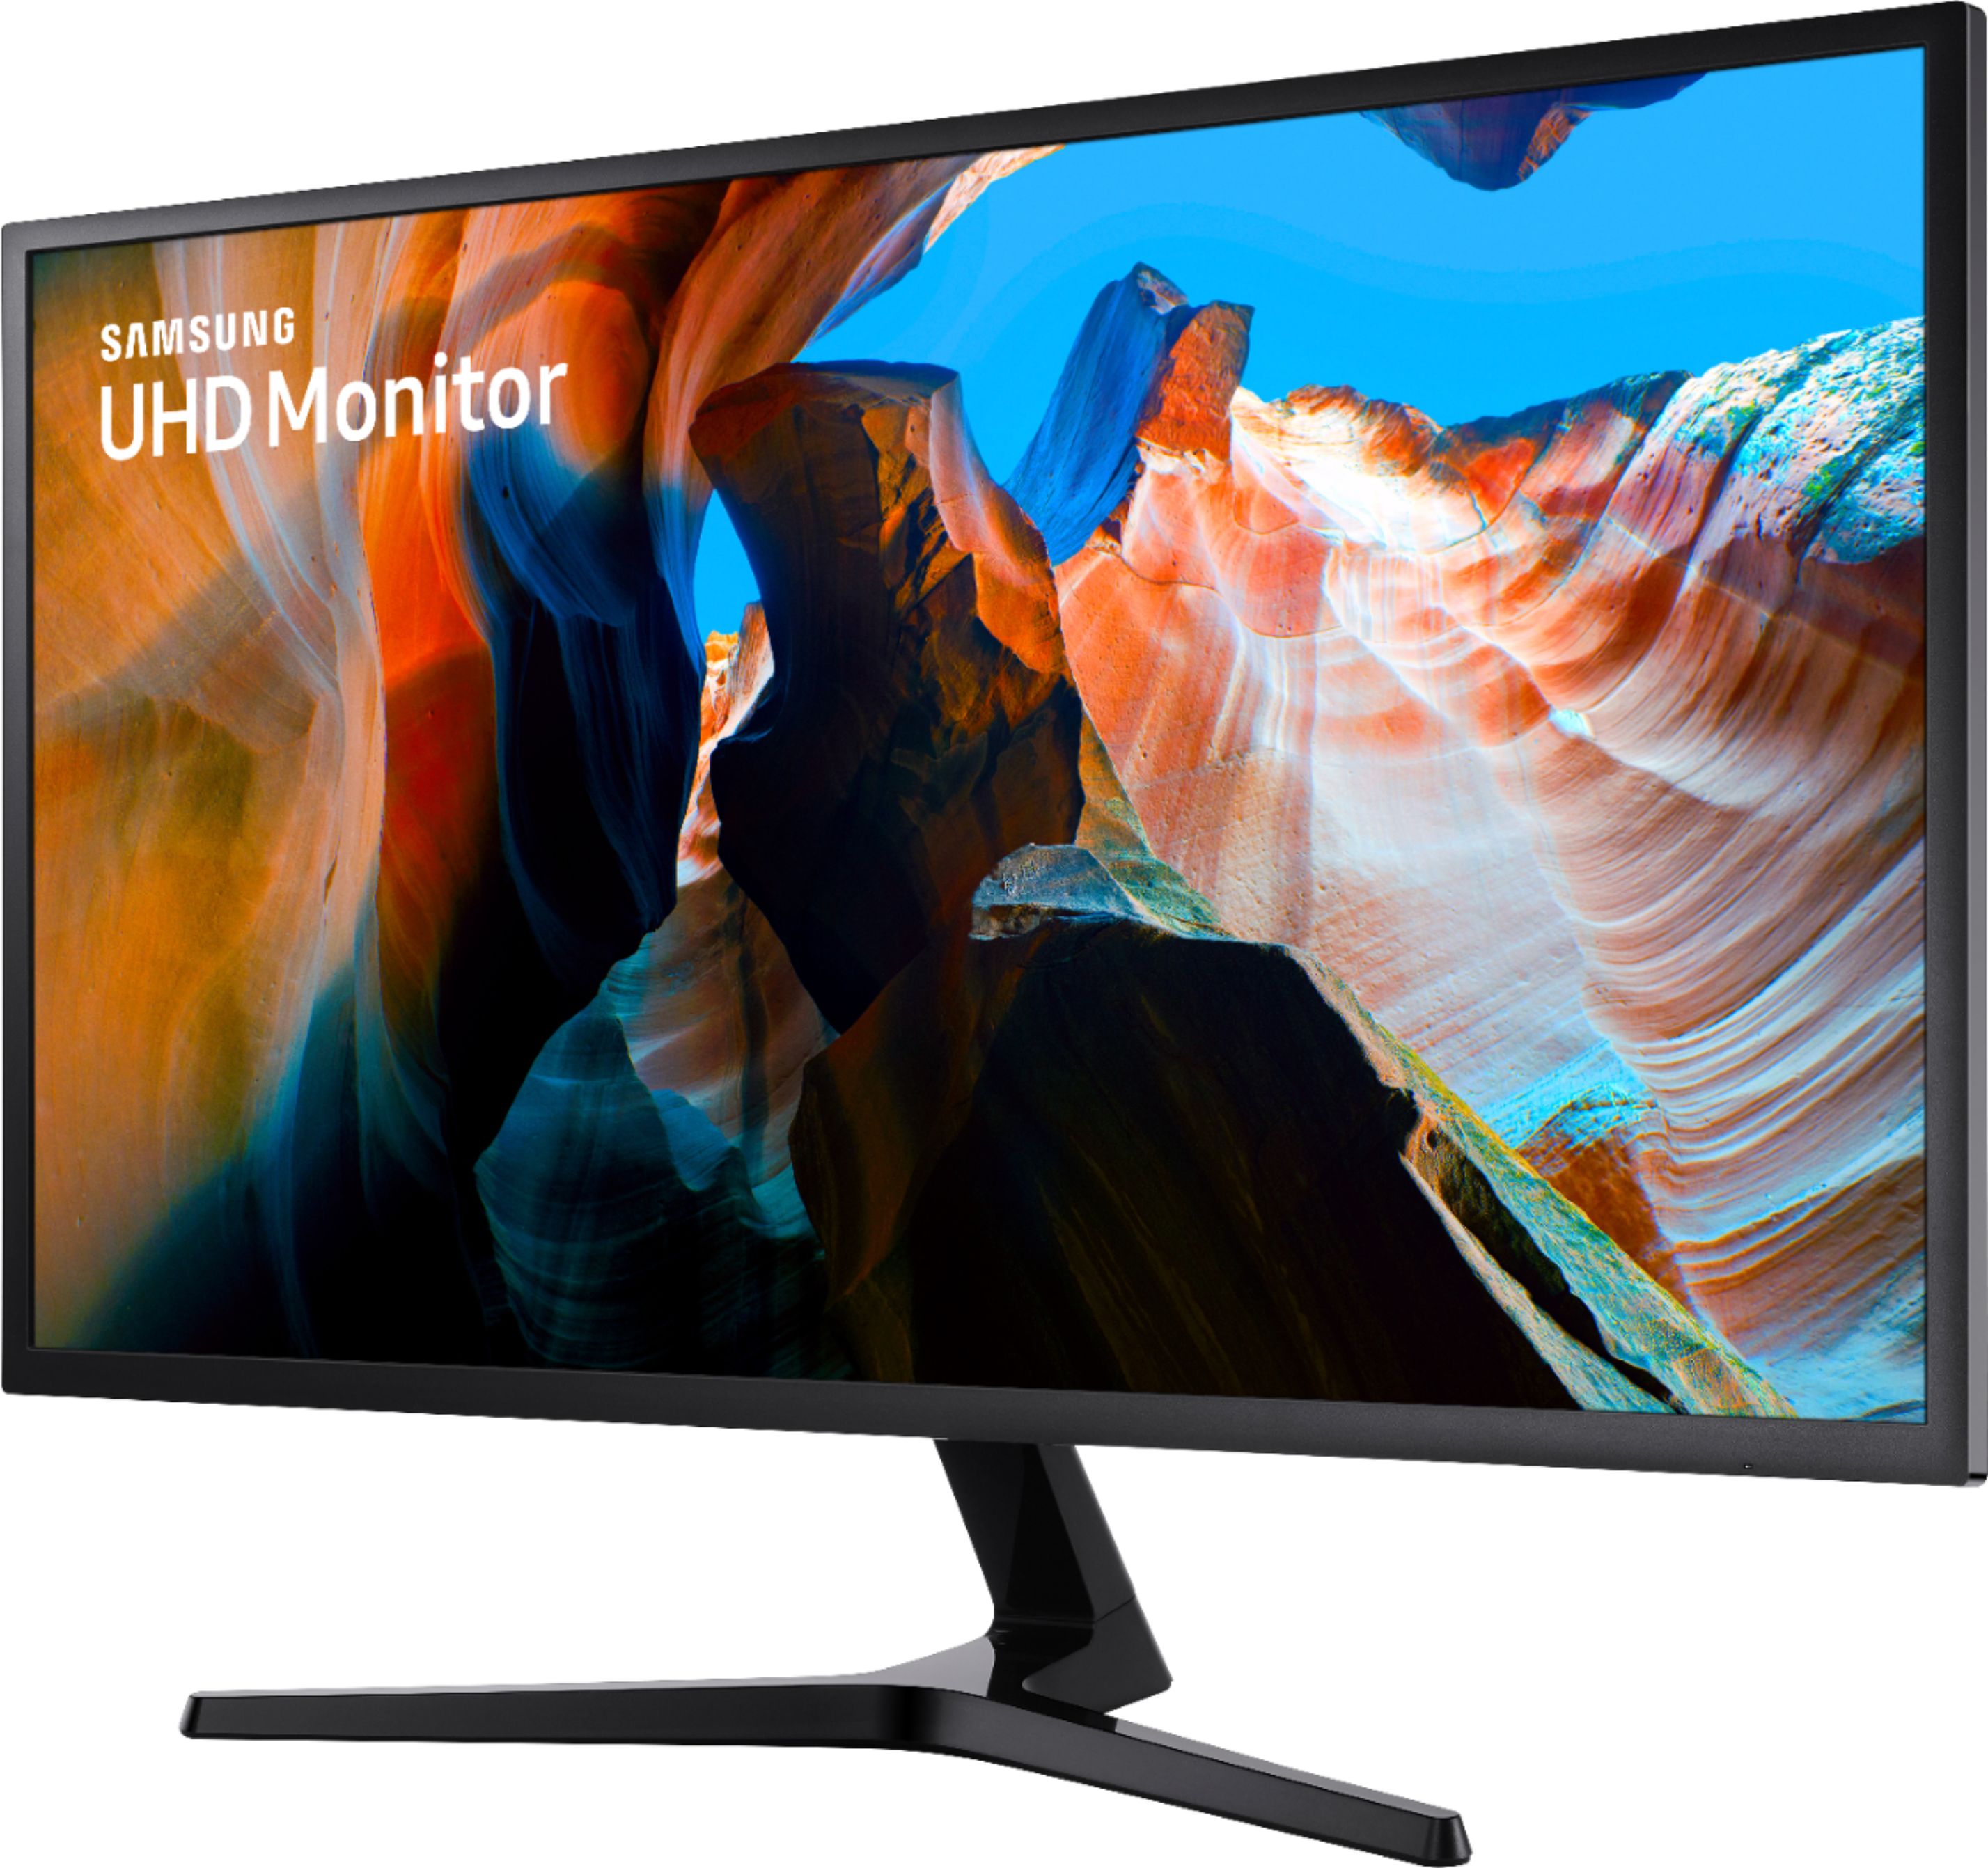 Left View: Samsung - G77 Series 27" Curved WQHD Gaming Monitor With Special T1 Faker Design (HDMI, USB) - Black